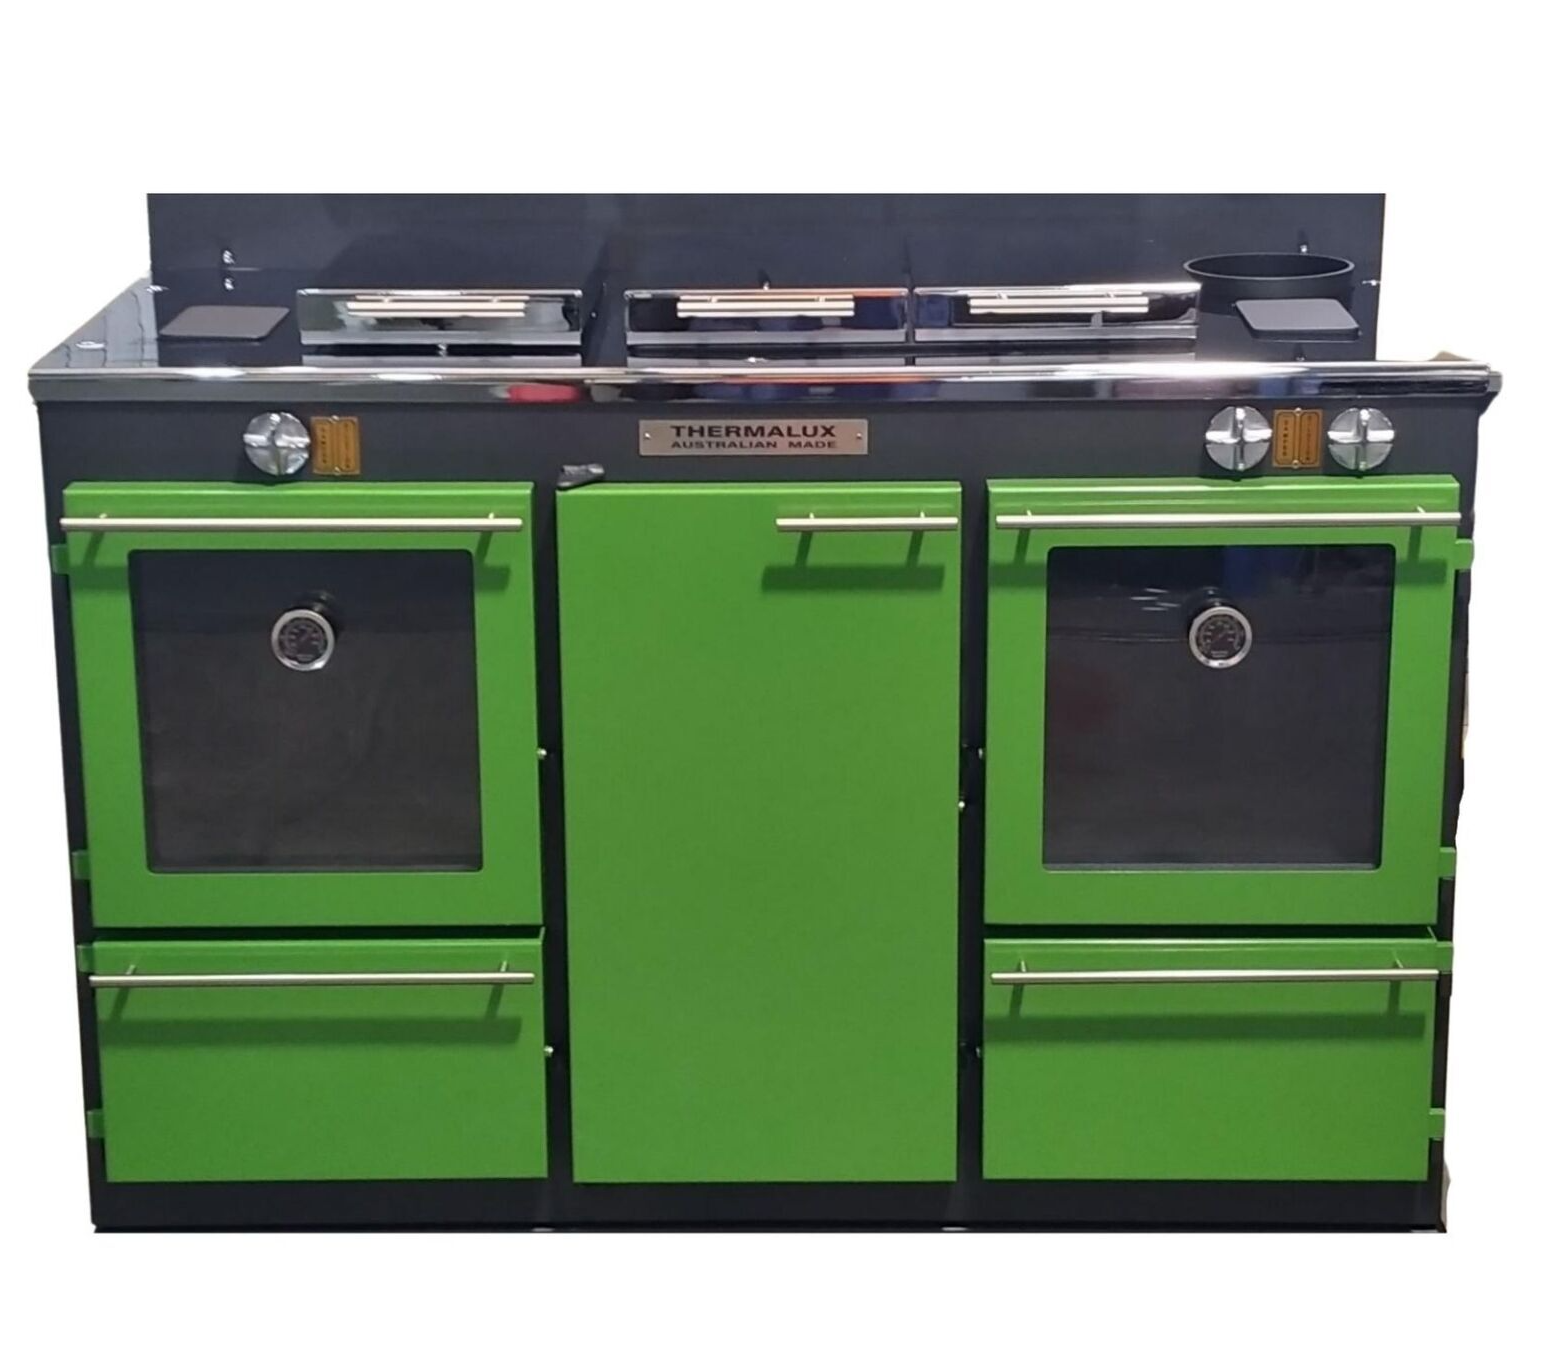 Thermalux wood stove in viper green